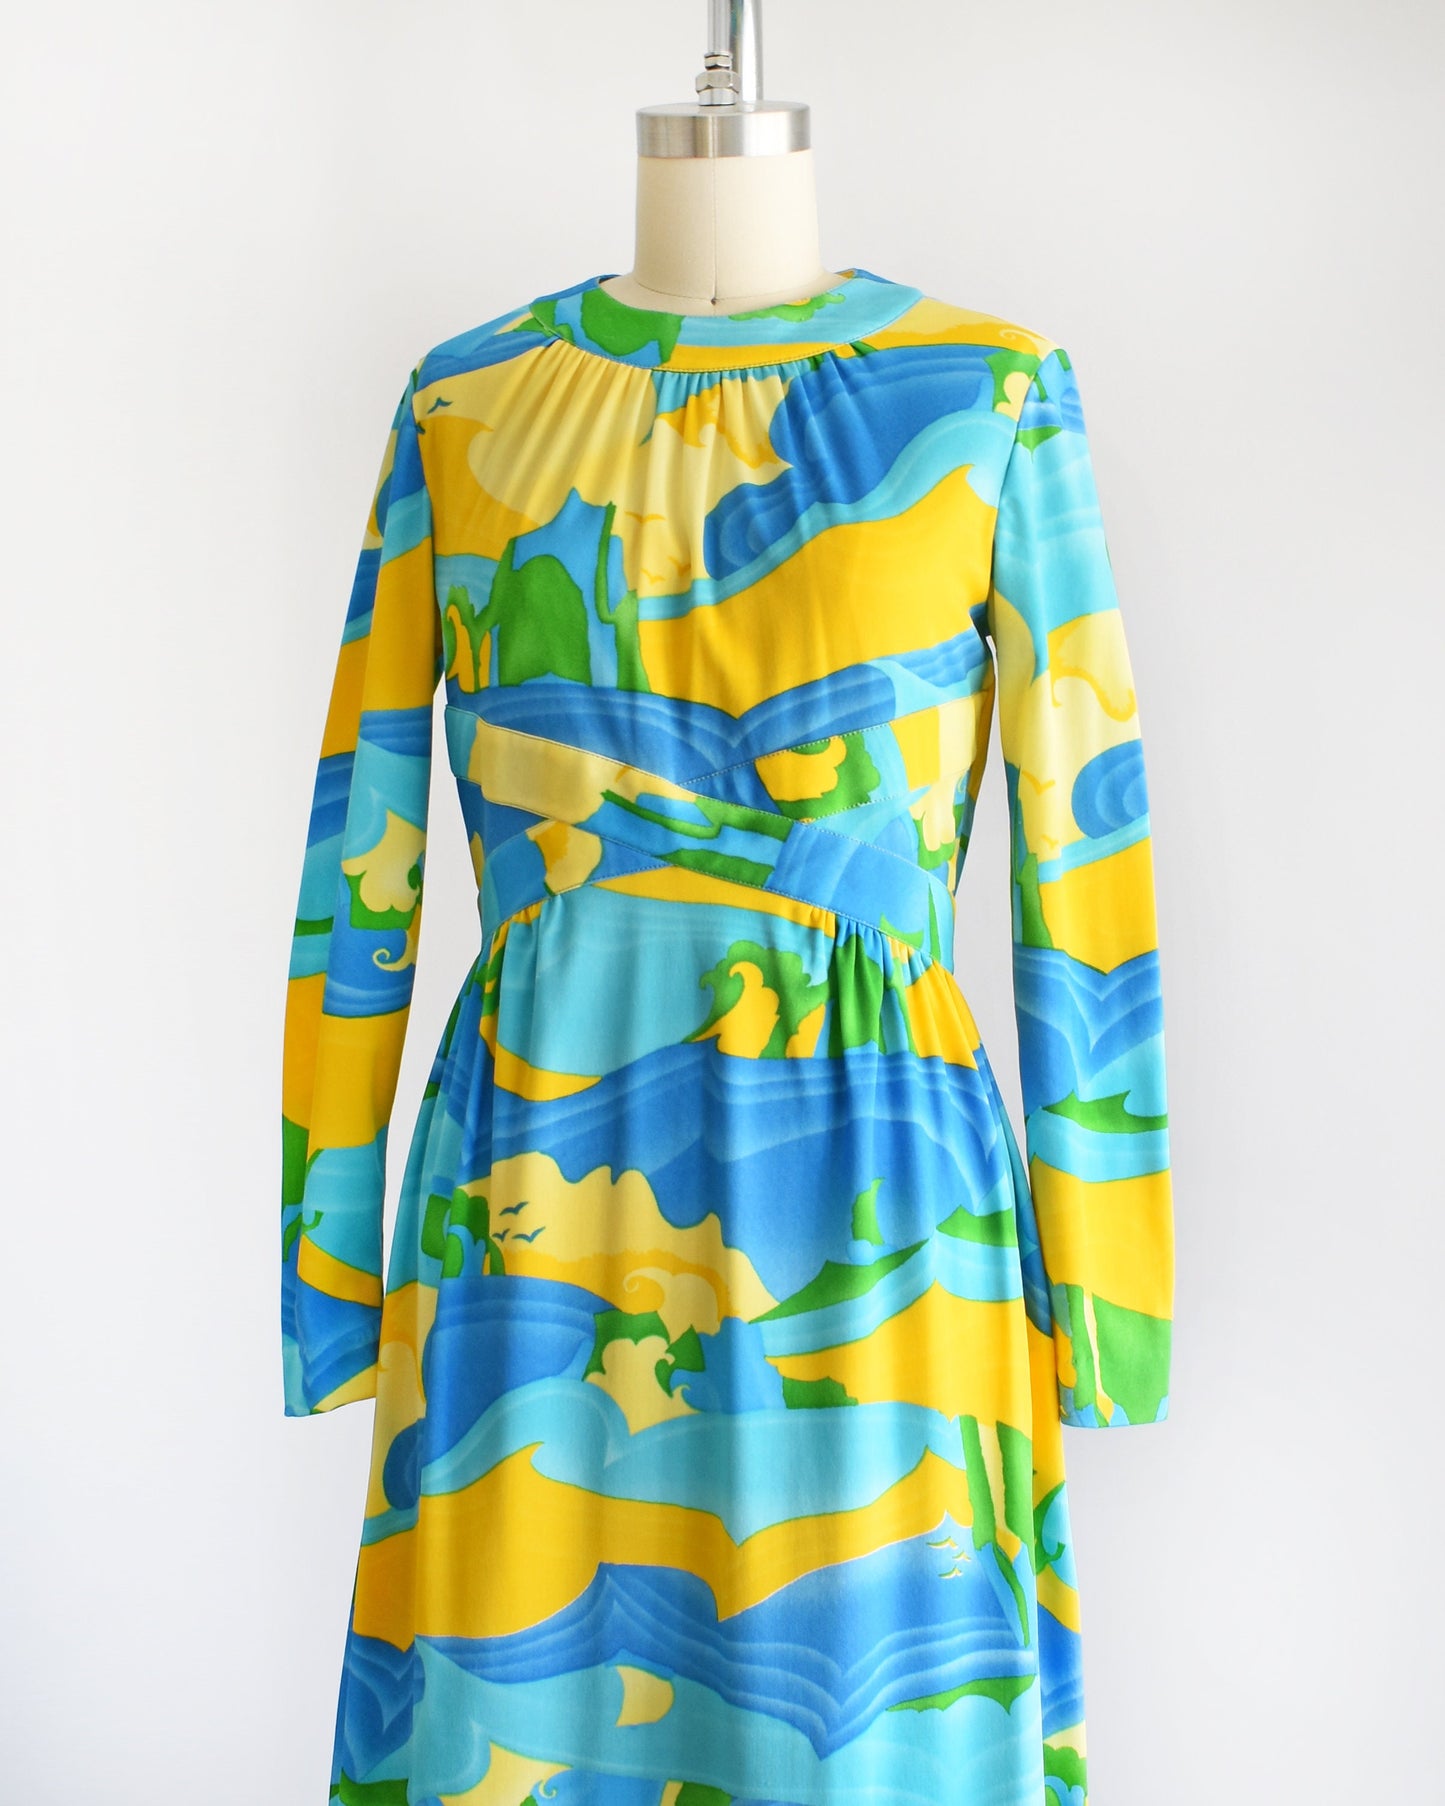 Side front view of a vintage 70s maxi dress with a blue, yellow, and green ocean landscape print that has sea, sand, and sky, with greenery in the back and birds in the sky. The dress has long sleeves and is on a dress form.